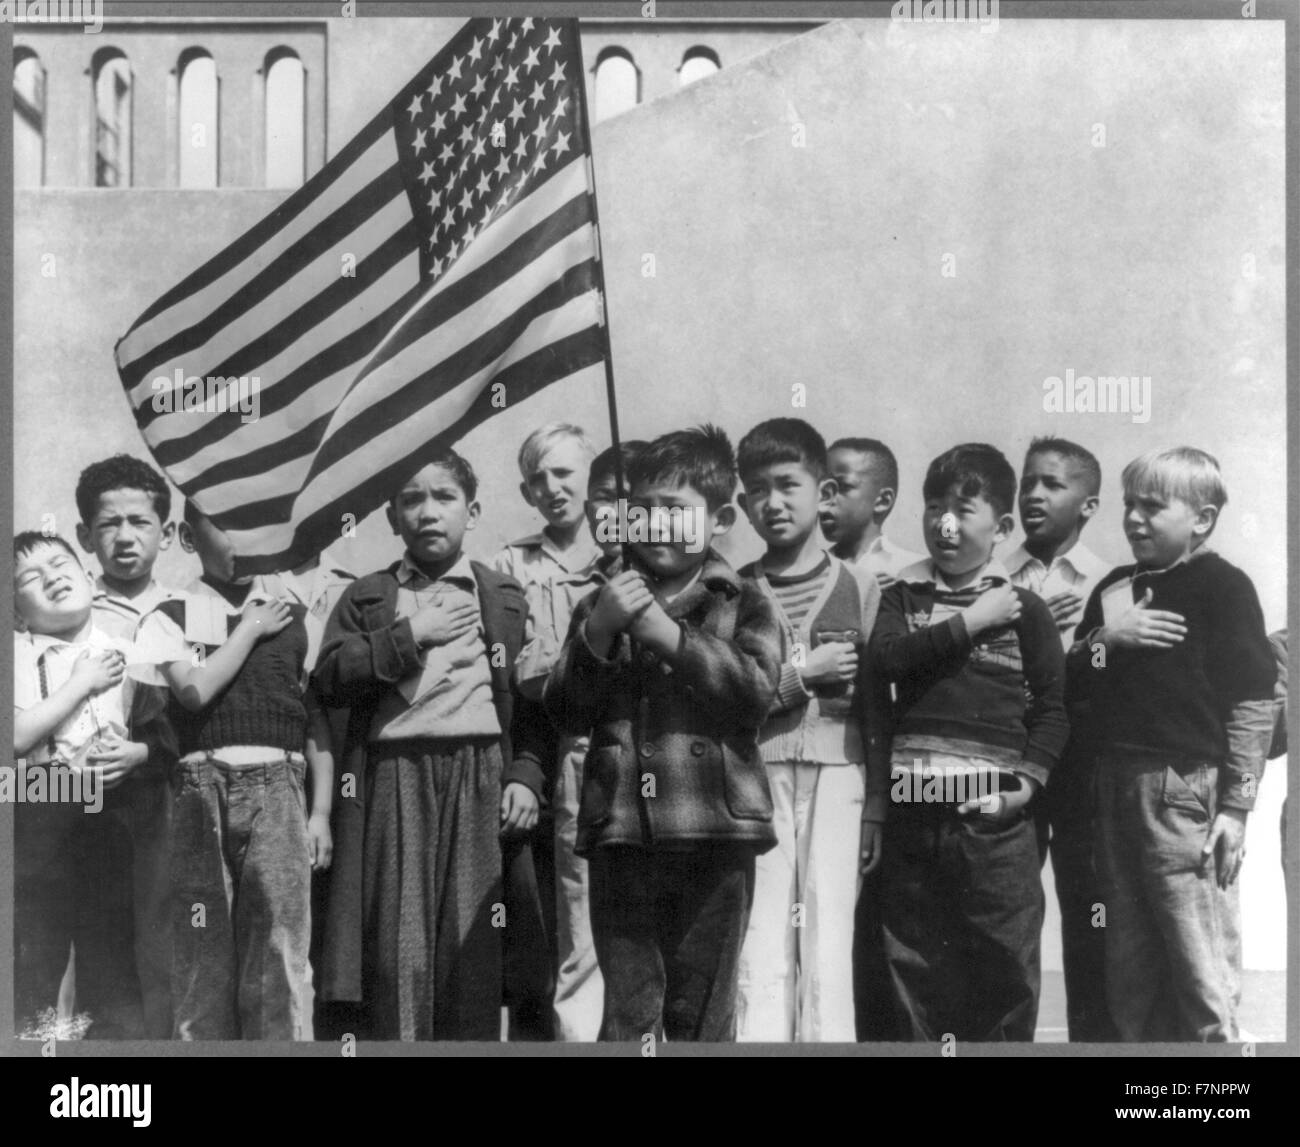 San Francisco, Calif., April 1942. Children at the Weill public school for the so-called international settlement and including many Japanese-Americans, saluting the flag. They include evacuees of Japanese descent who will be housed in War relocation authority centres for the duration Stock Photo